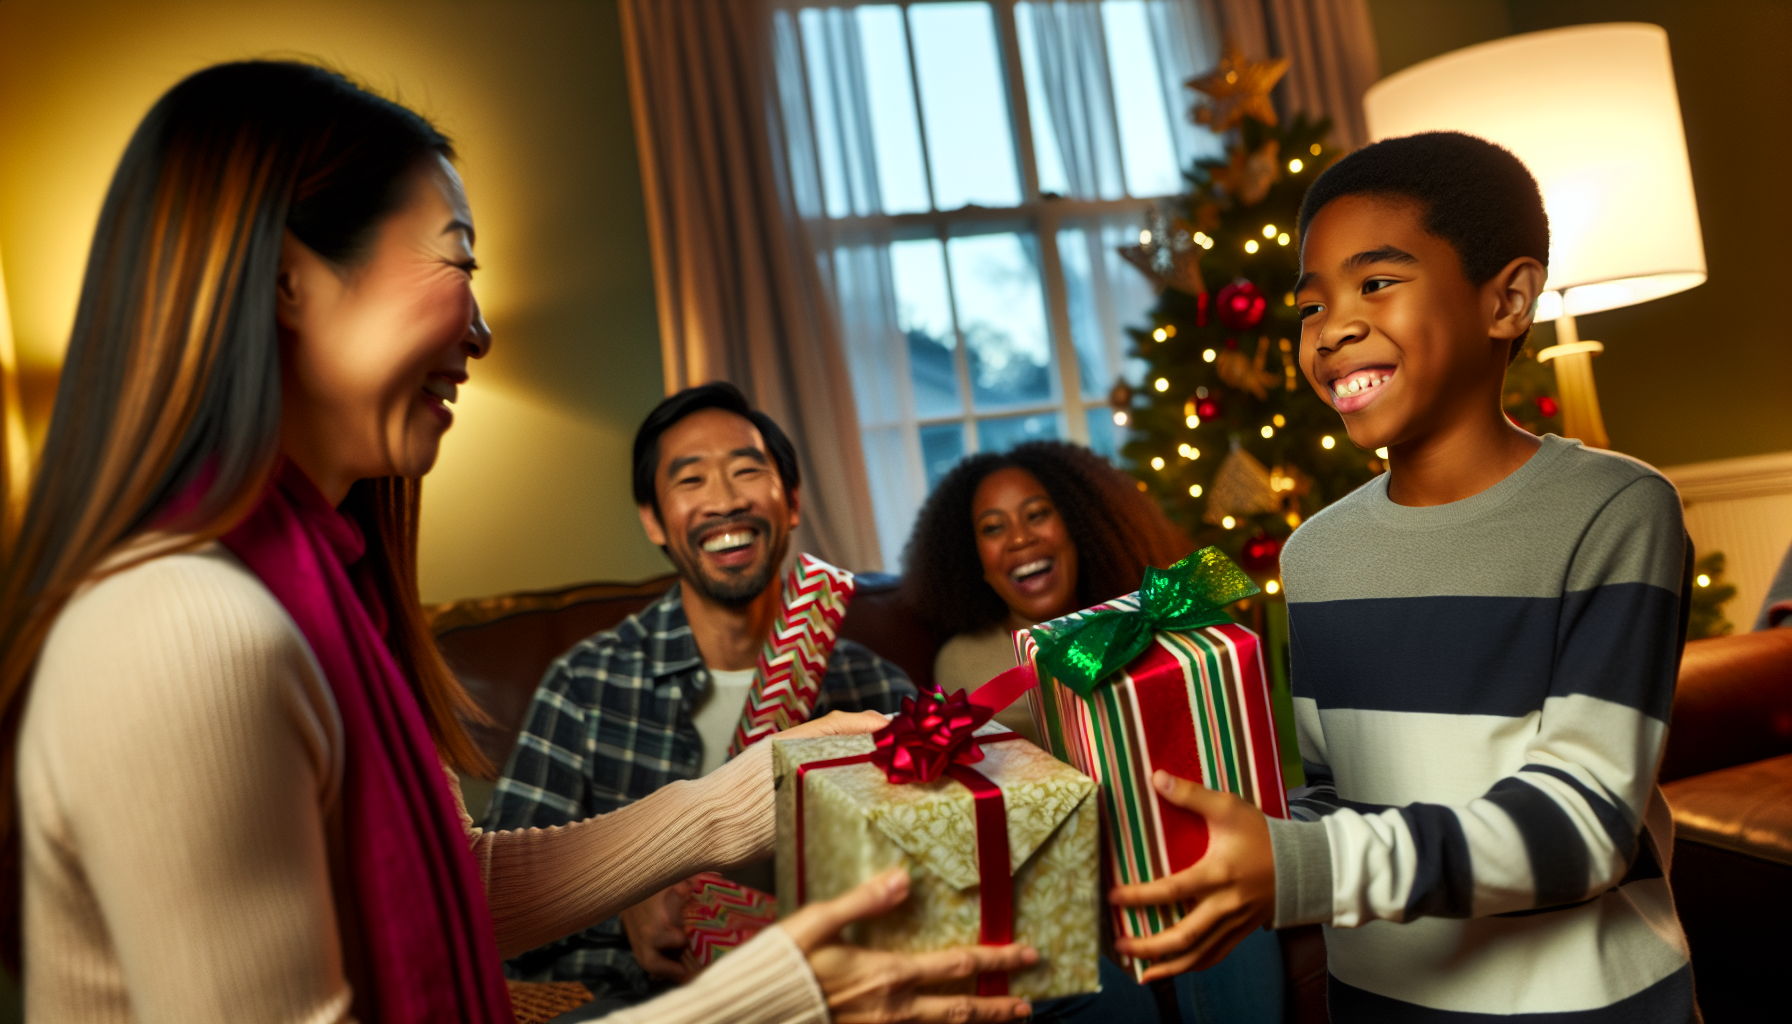 Streamlining gift-giving practices to reduce stress and focus on meaningful connections